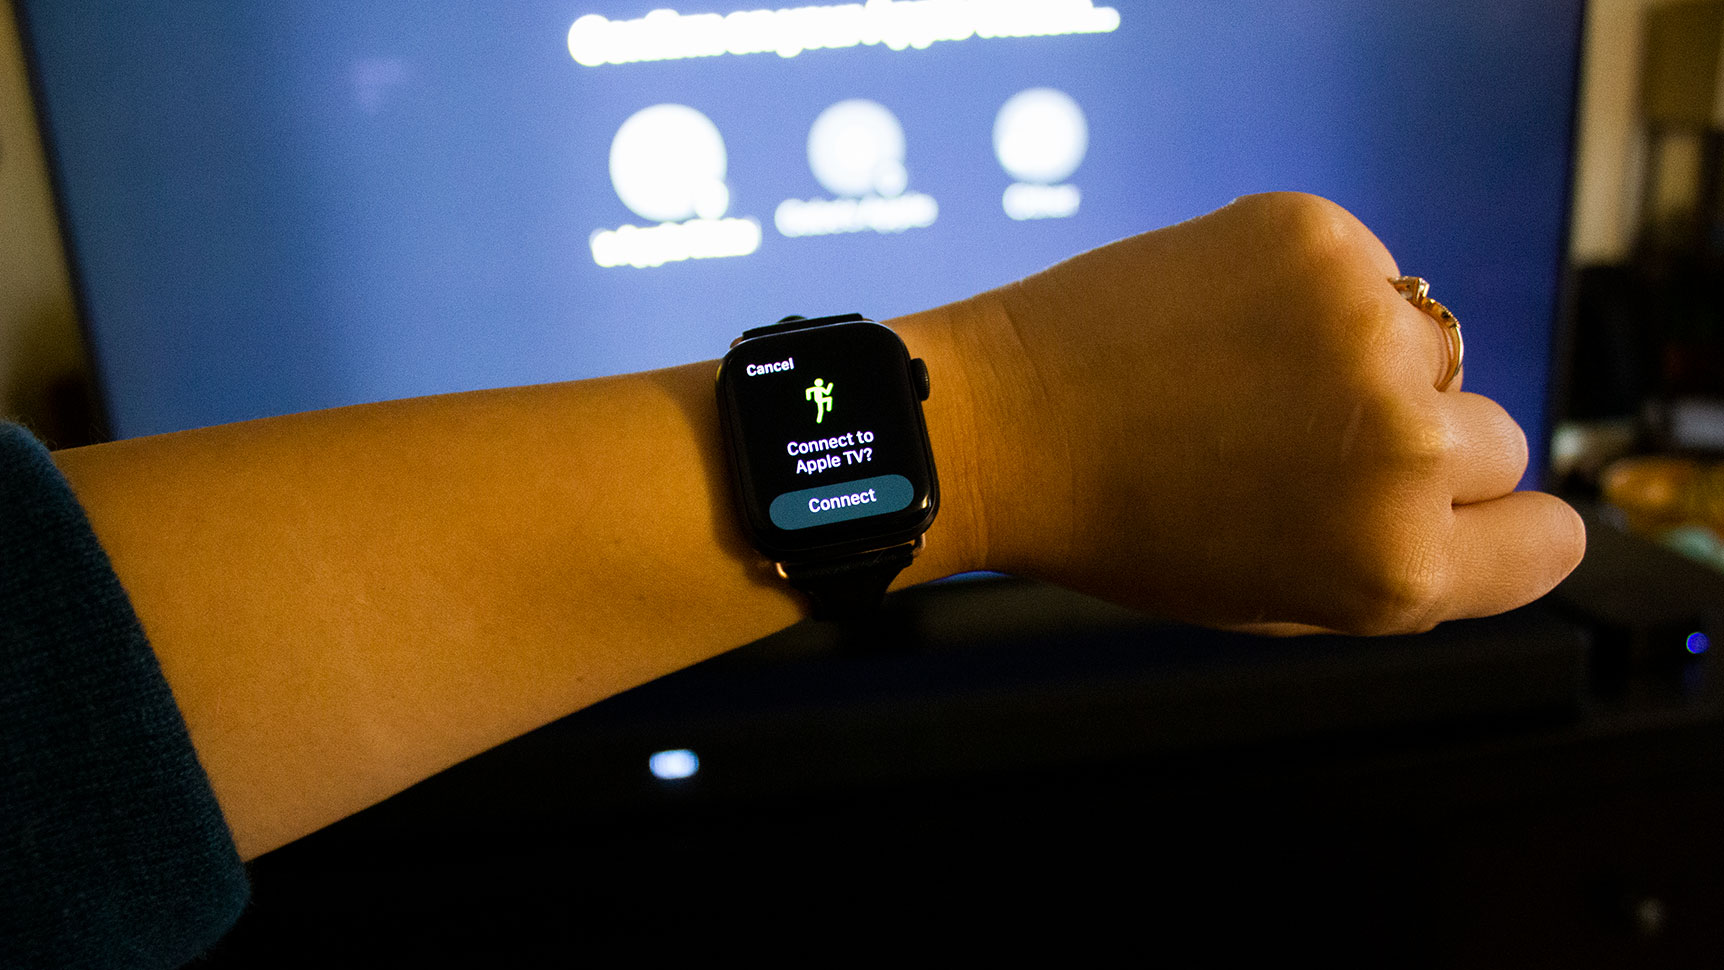 The Apple TV can auto-detect who in your house has an Apple Watch in proximity. It will also ask you to confirm which watch wants to connect before starting a workout.  (Image: Victoria Song/Gizmodo)